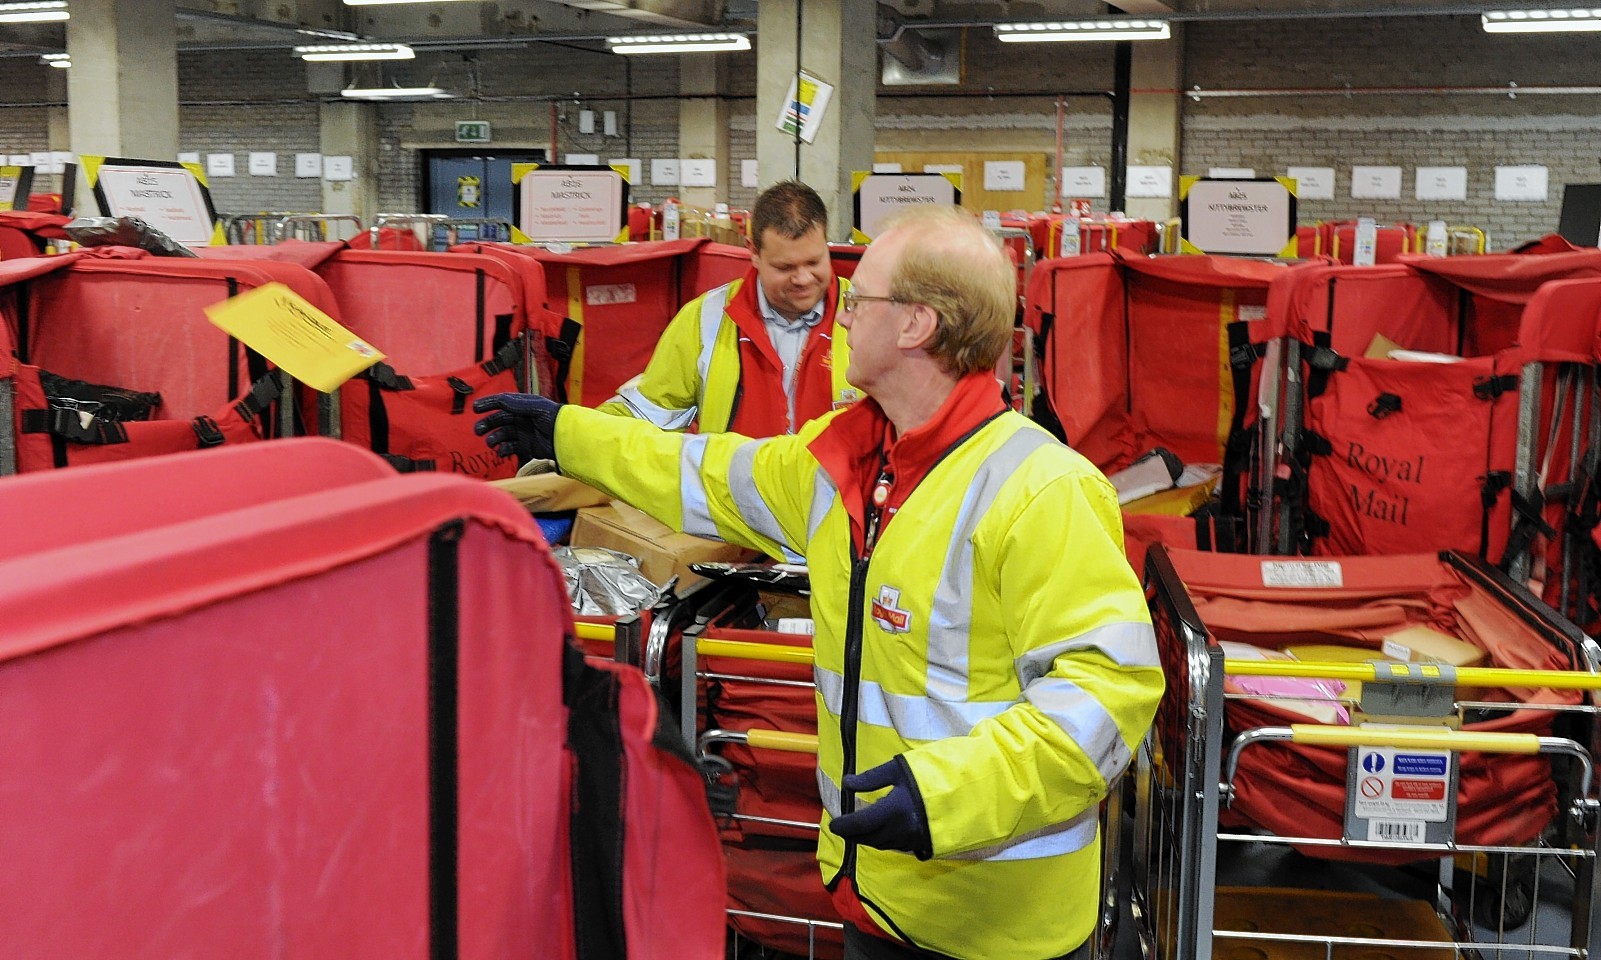 Royal Mail in Aberdeen sorting cards and parcels on the busiest day of the year for the organisation